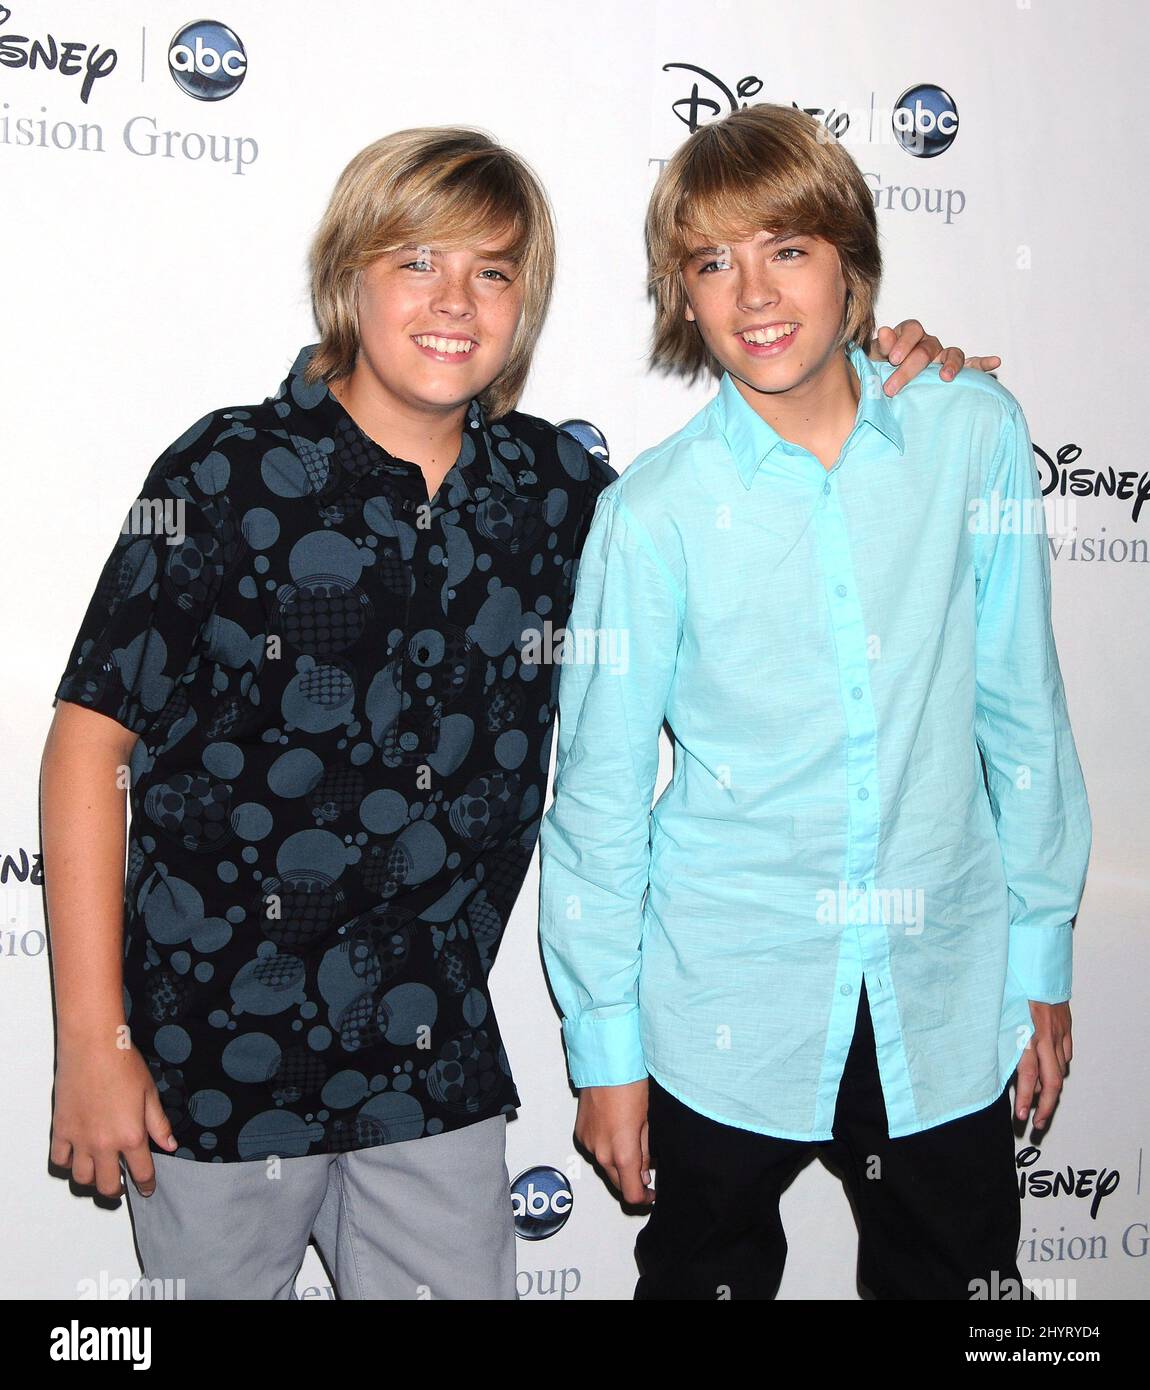 Dylan Sprouse and Cole Sprouse at the Disney ABC Television Group All Star Party held at the Beverly Hilton Hotel in Los Angeles. Stock Photo